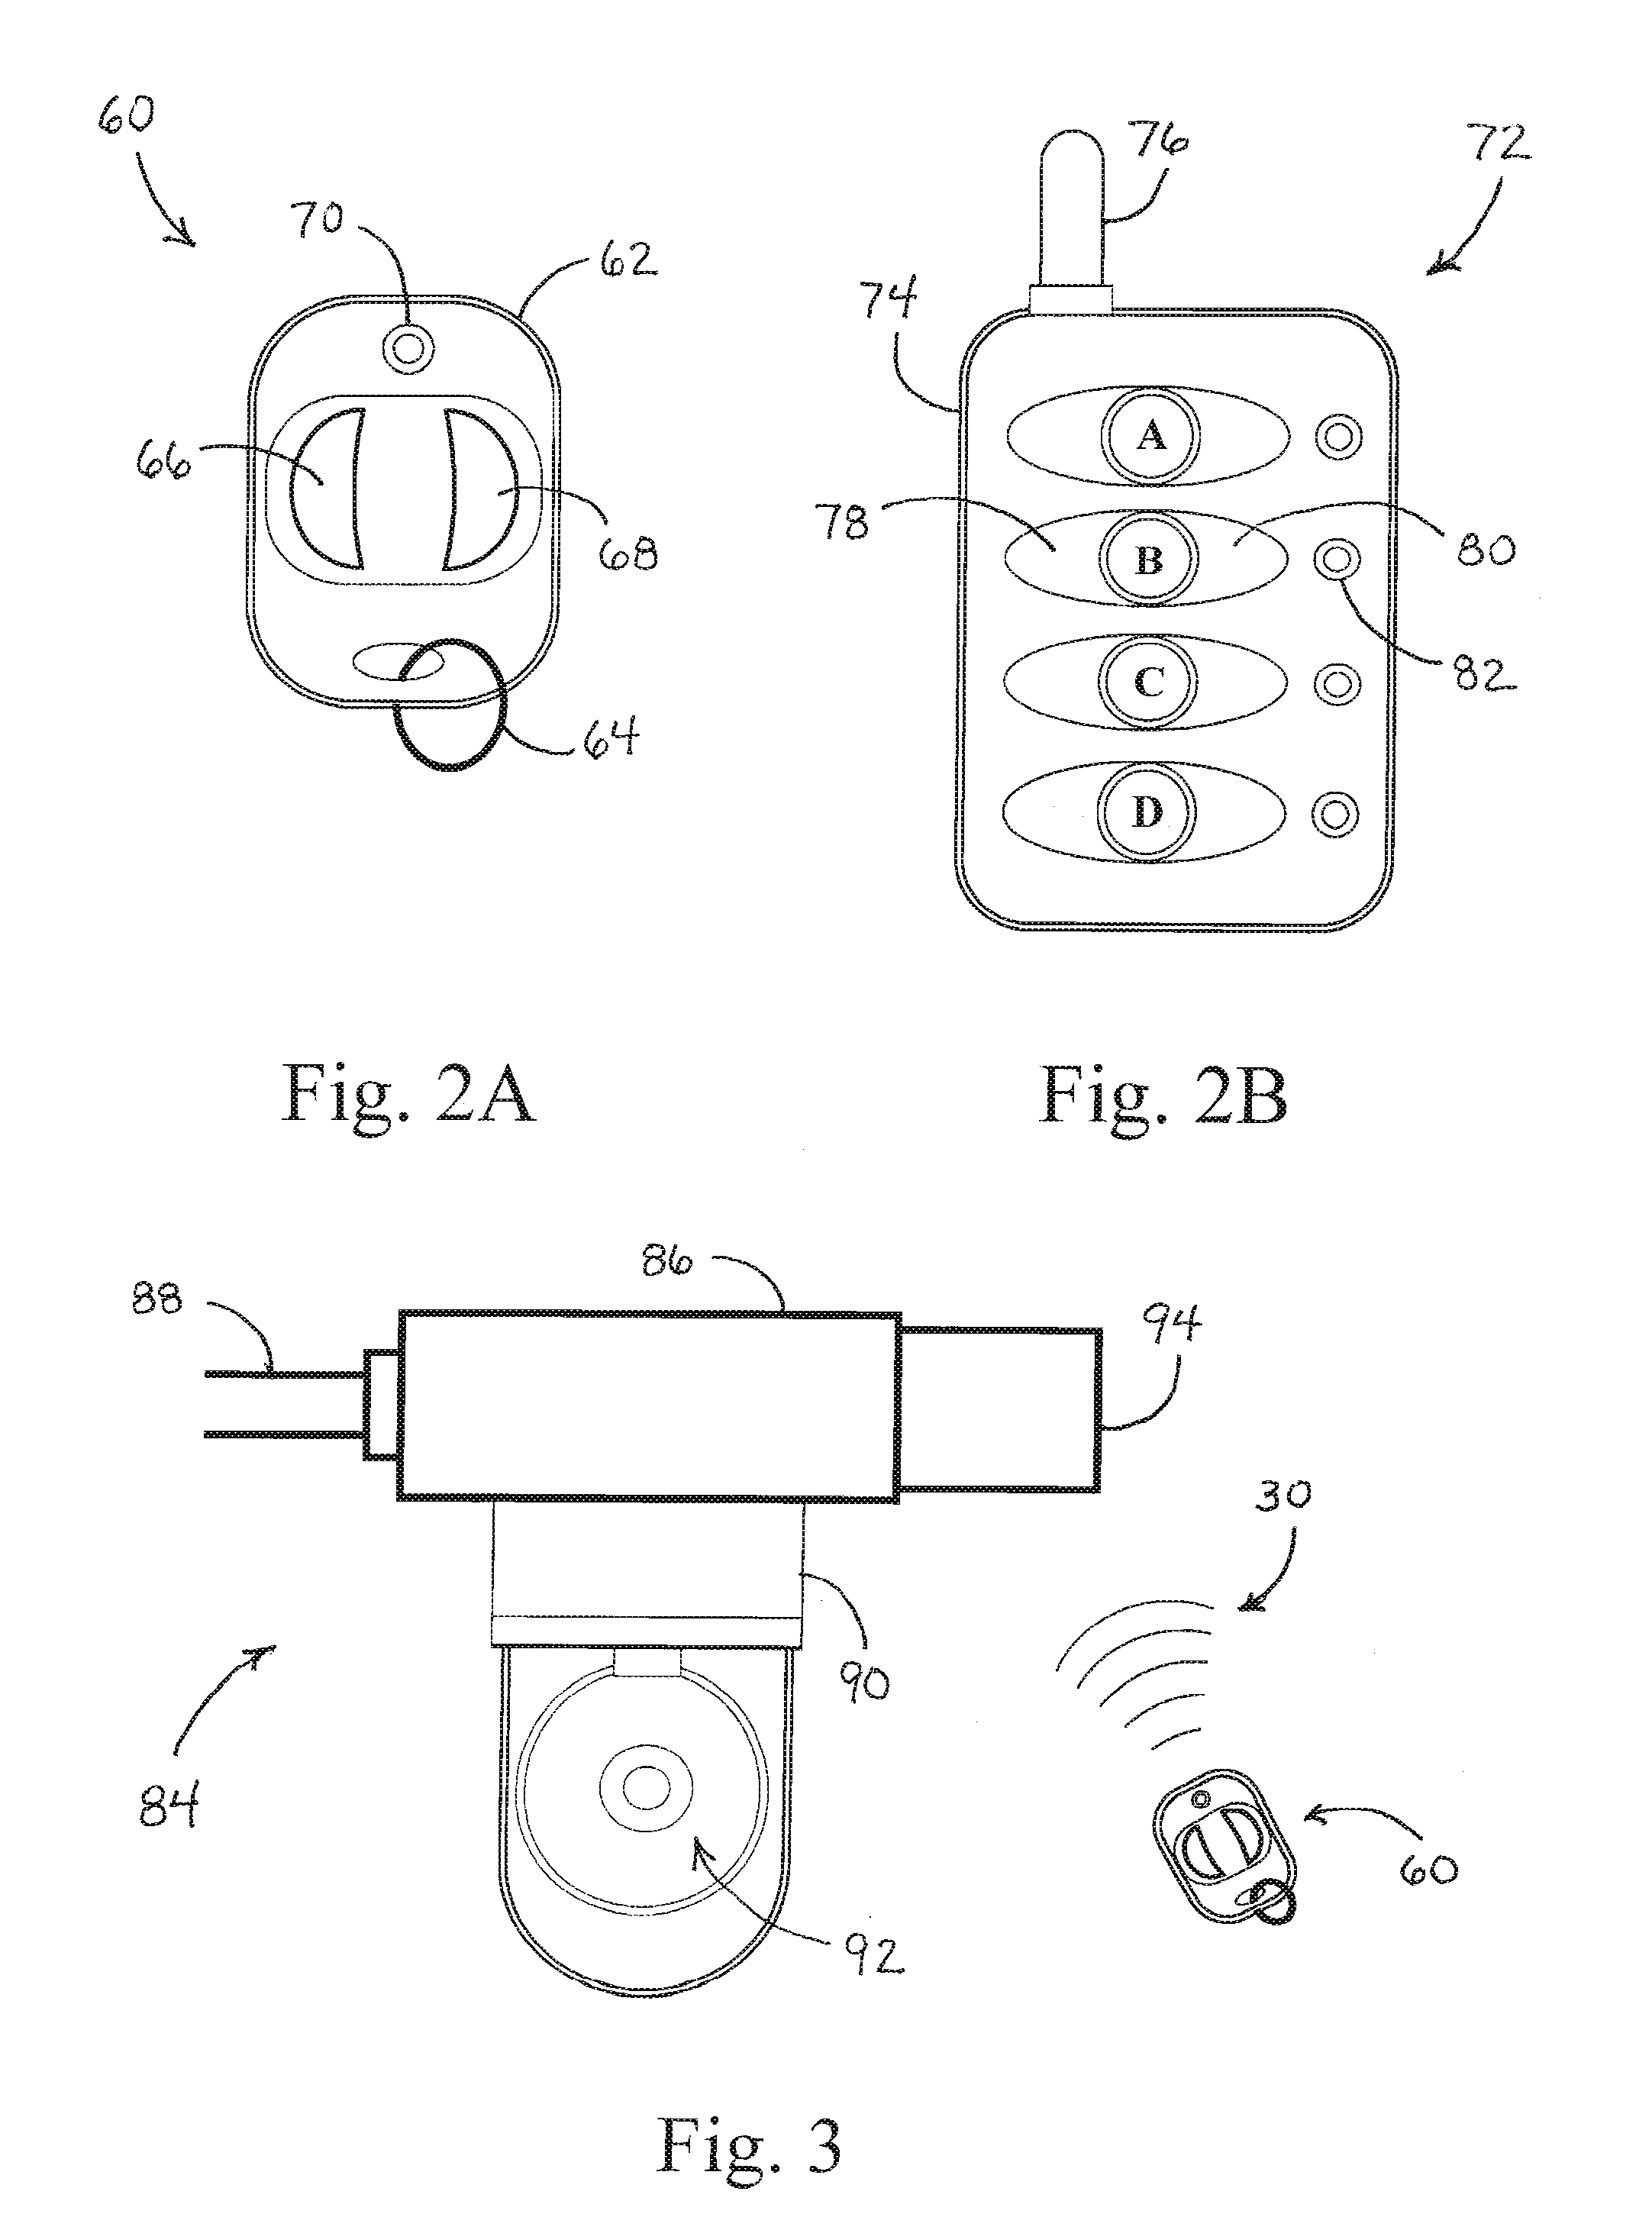 System for Wireless Activation of Communication Indicators within an Industrial or Professional Working Environment